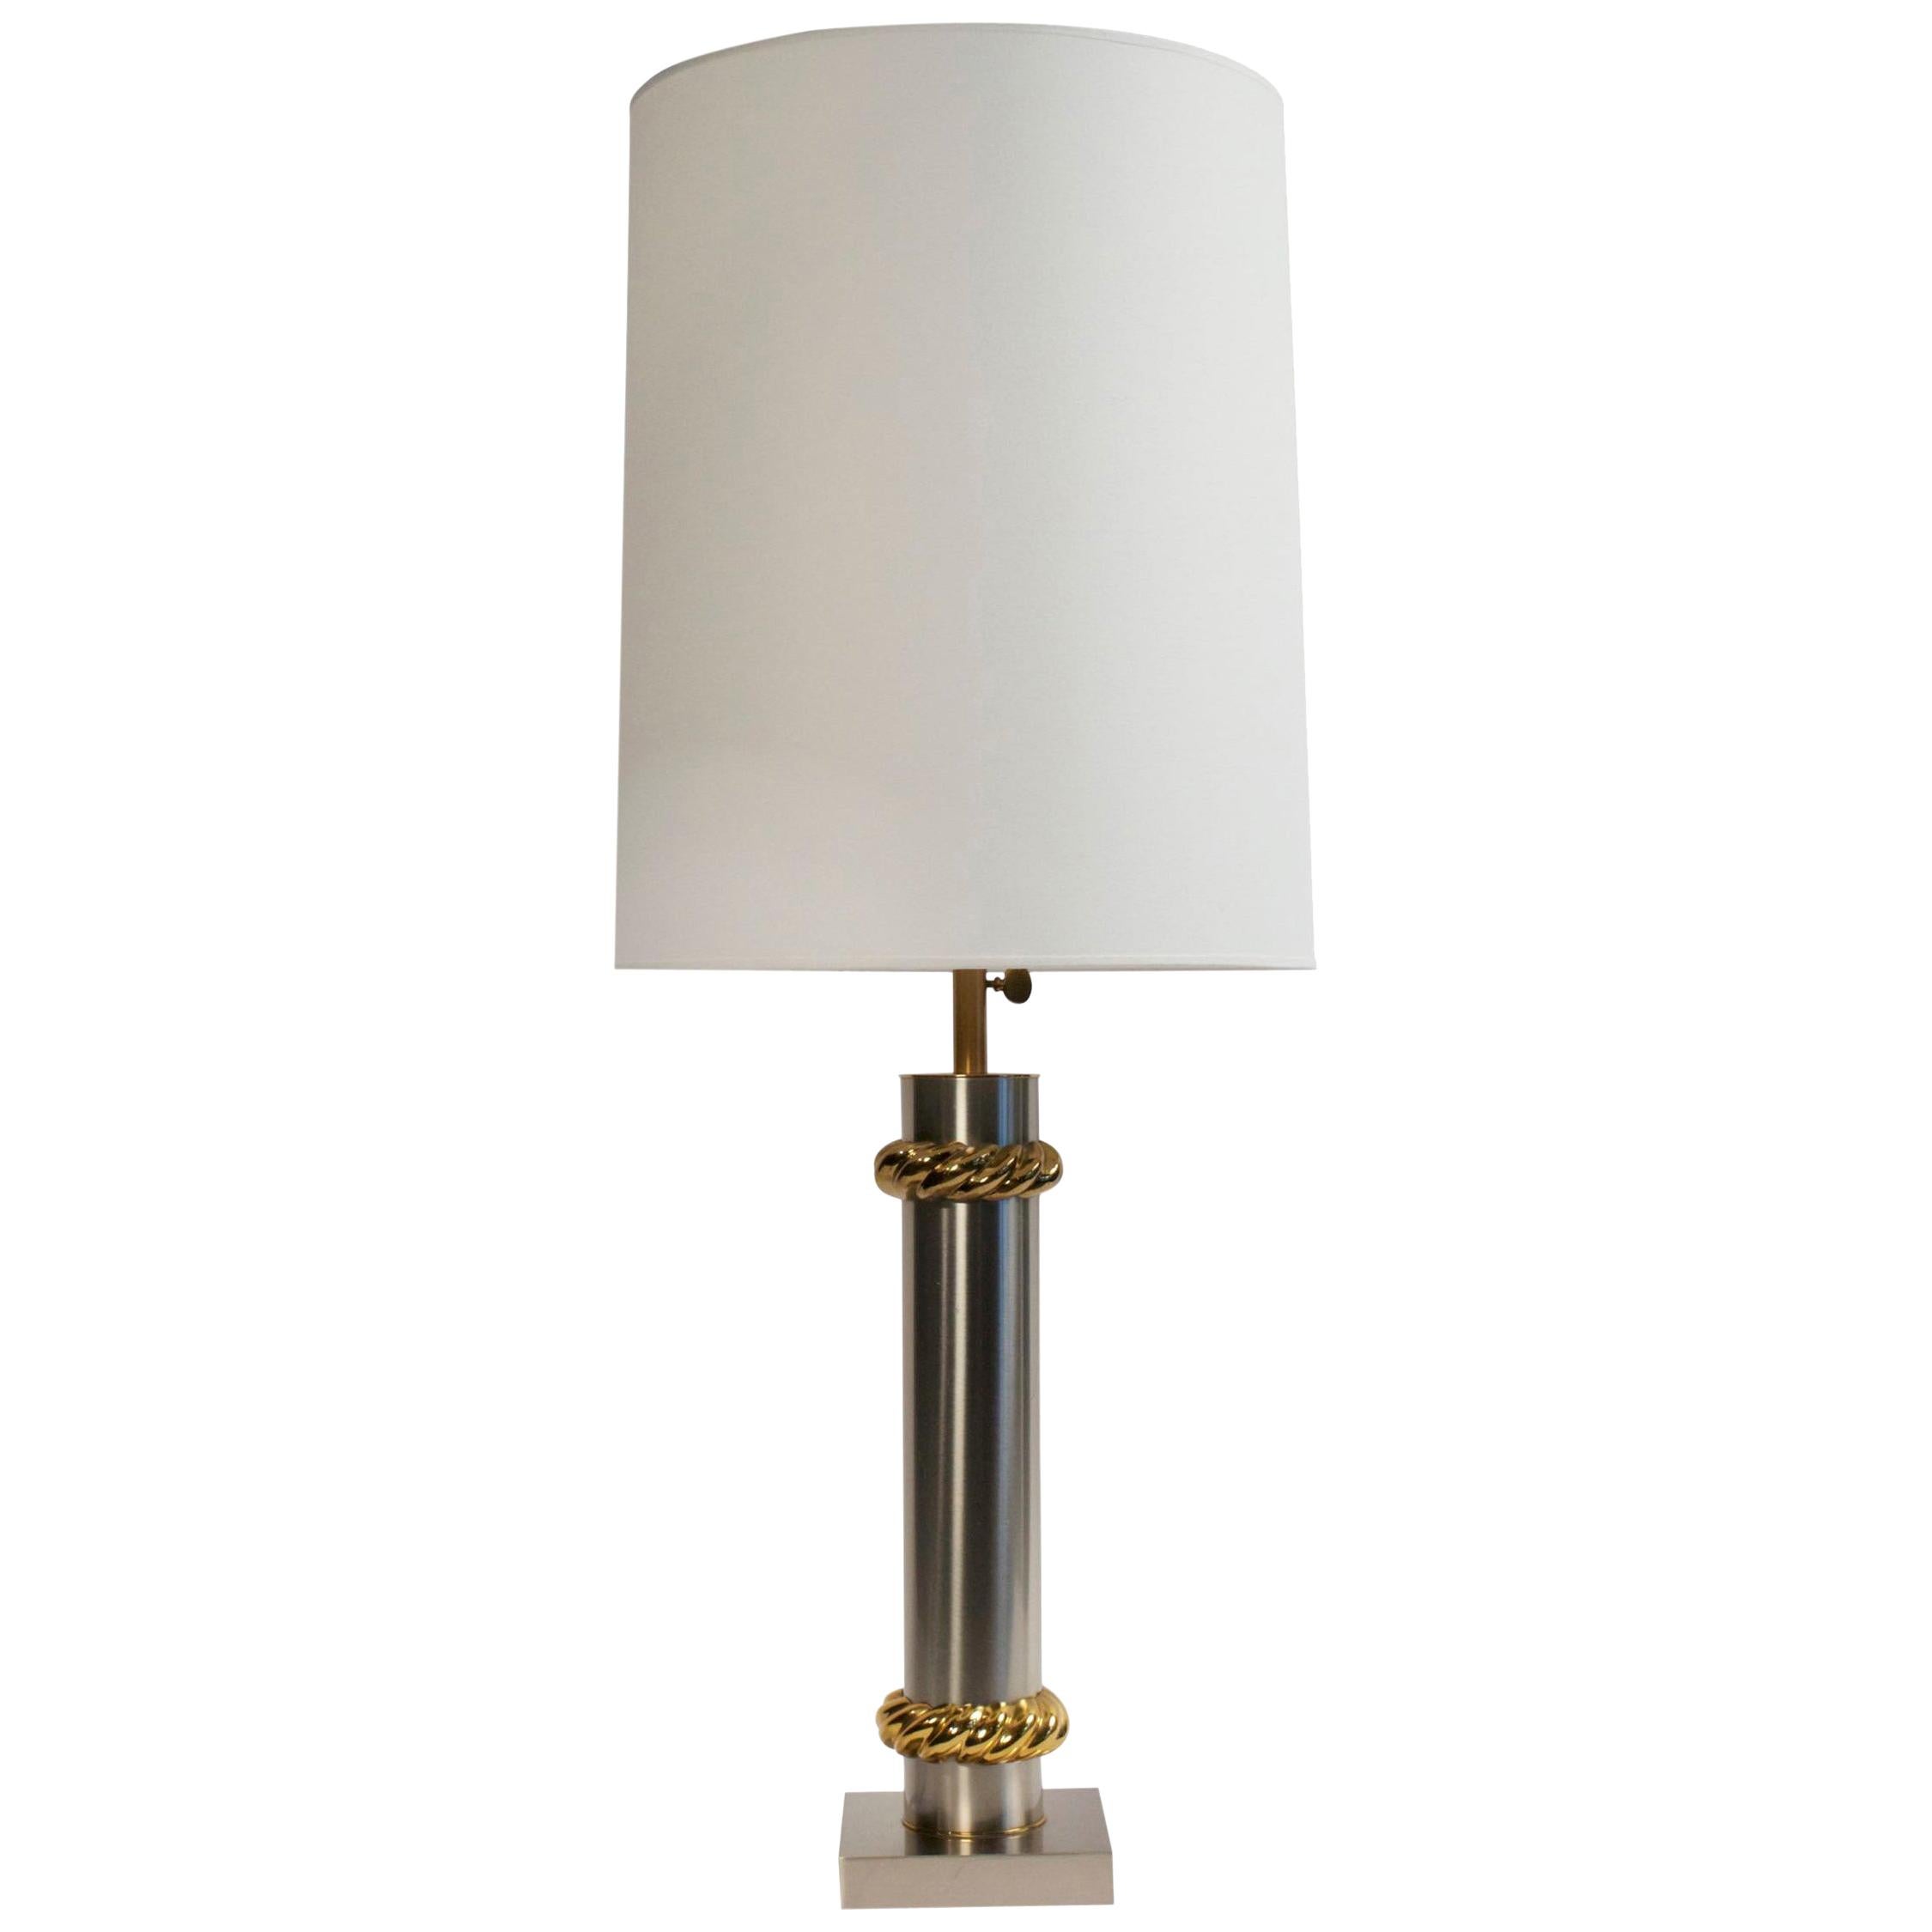 1970s "Florence" Model Table Lamp by Chrystiane Charles